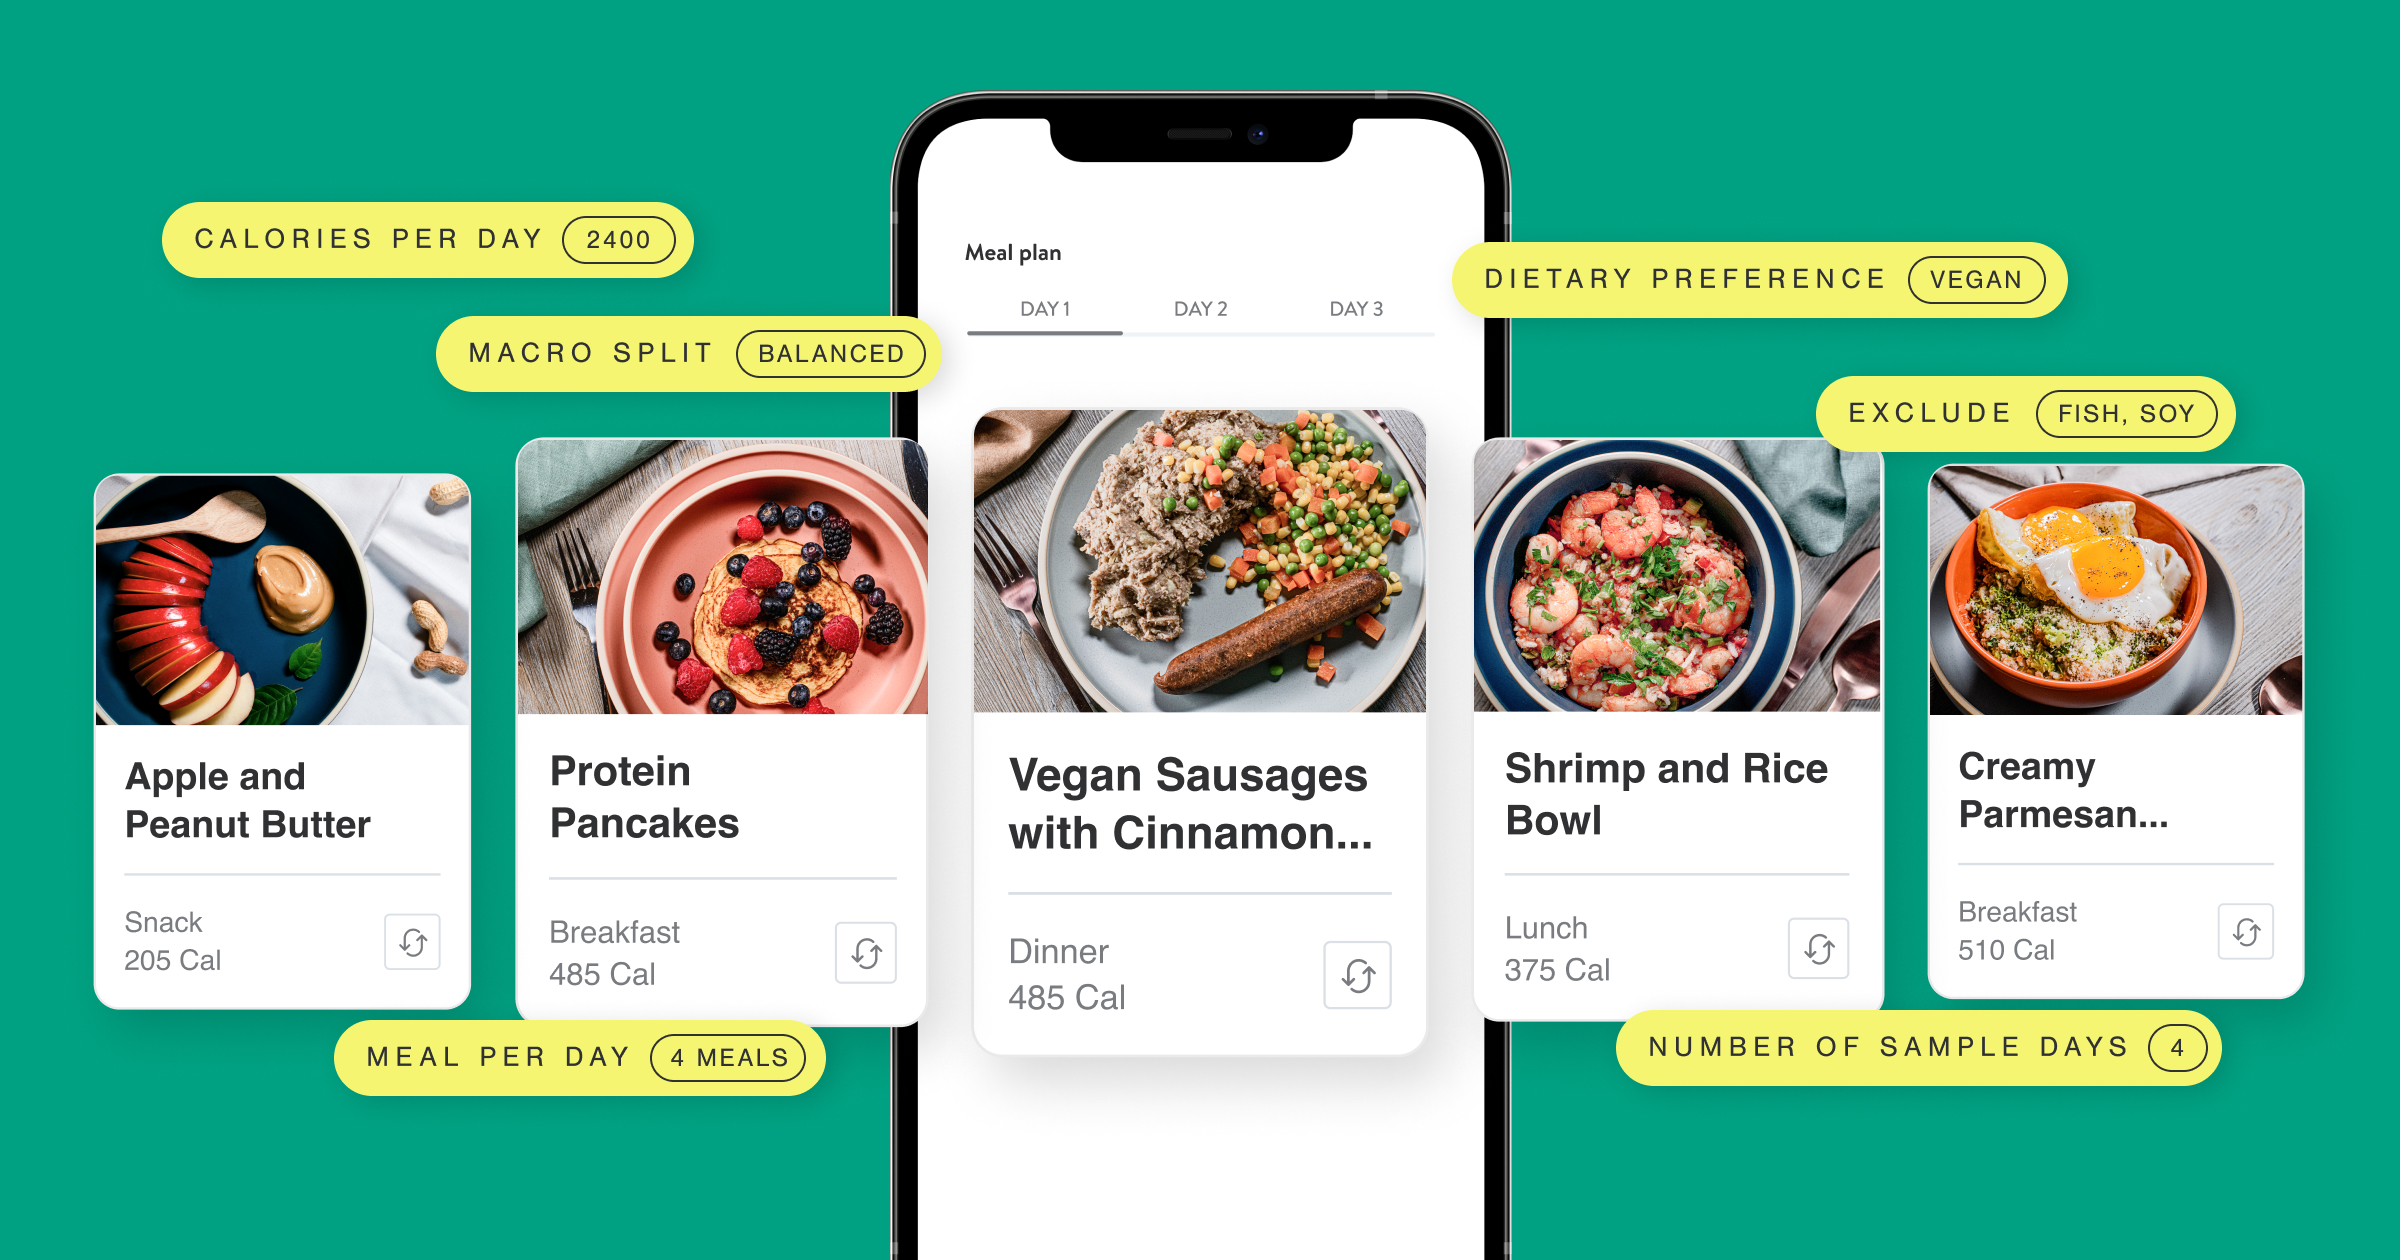 The Smart Meal Planner helps generate meals for clients, customized to their caloric goals, macro split, dietary preferences, and more.